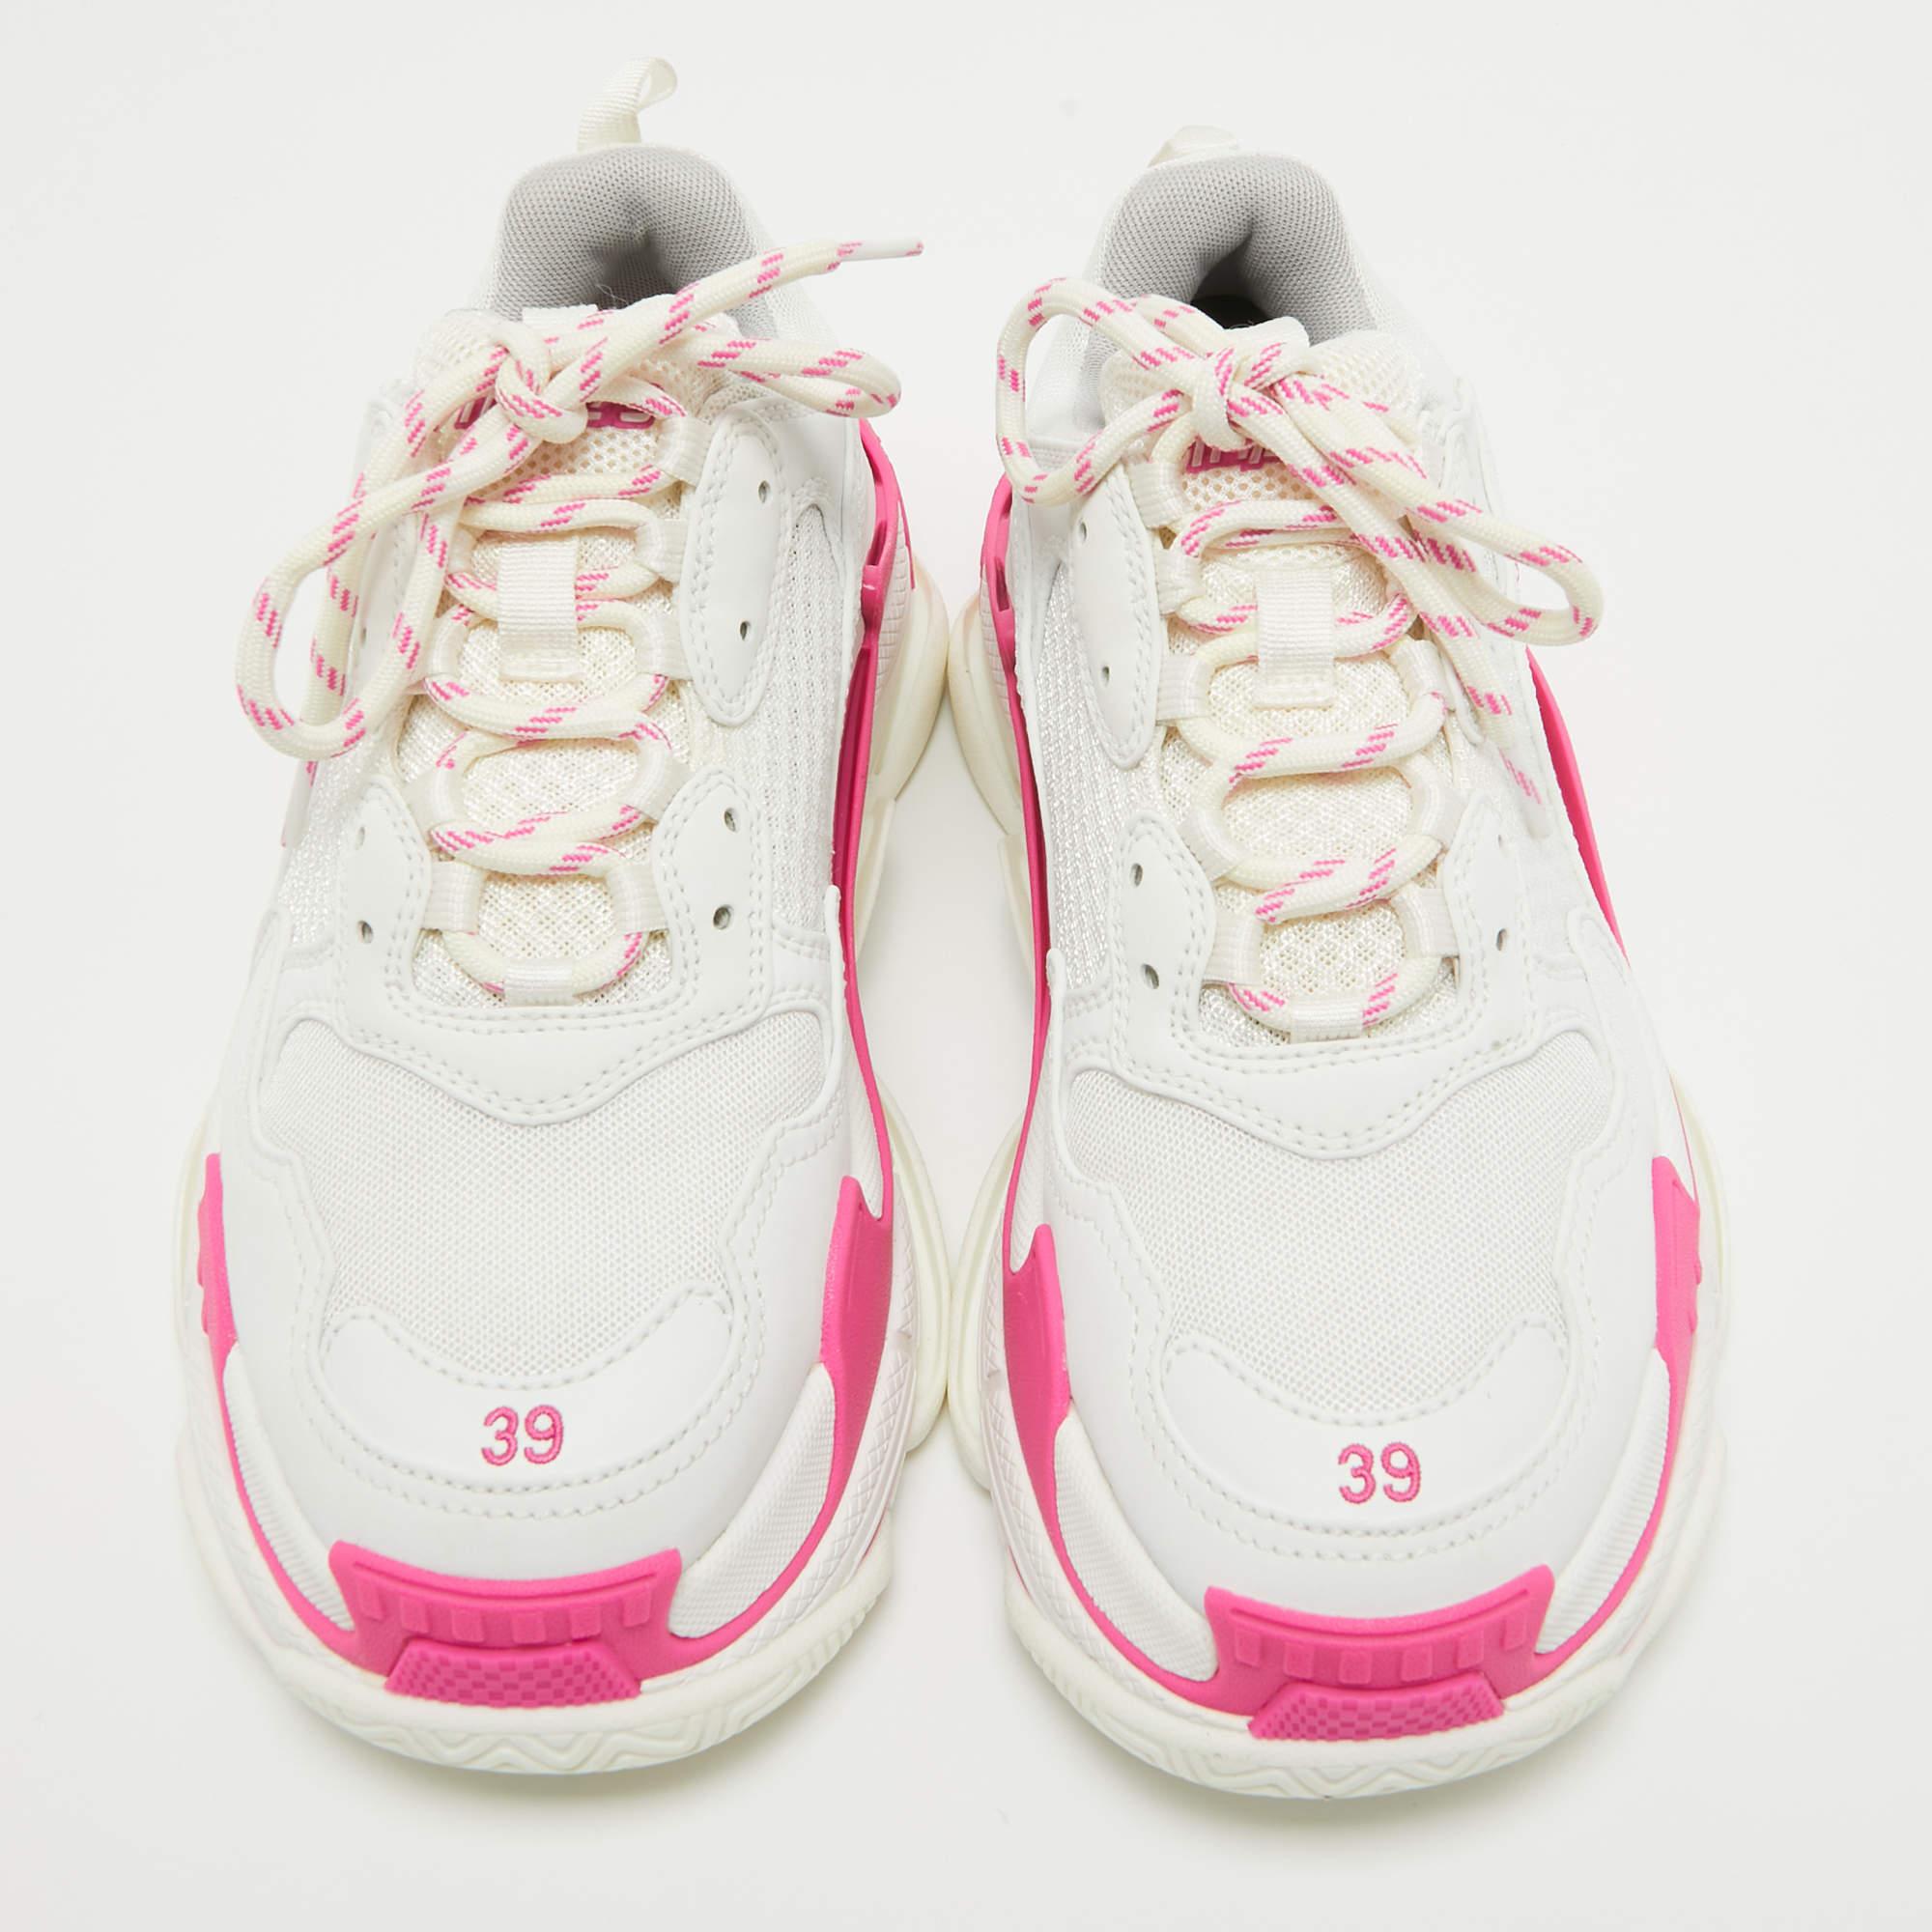 Balenciaga White/Pink Leather and Mesh Triple S Sneakers Size 39 1